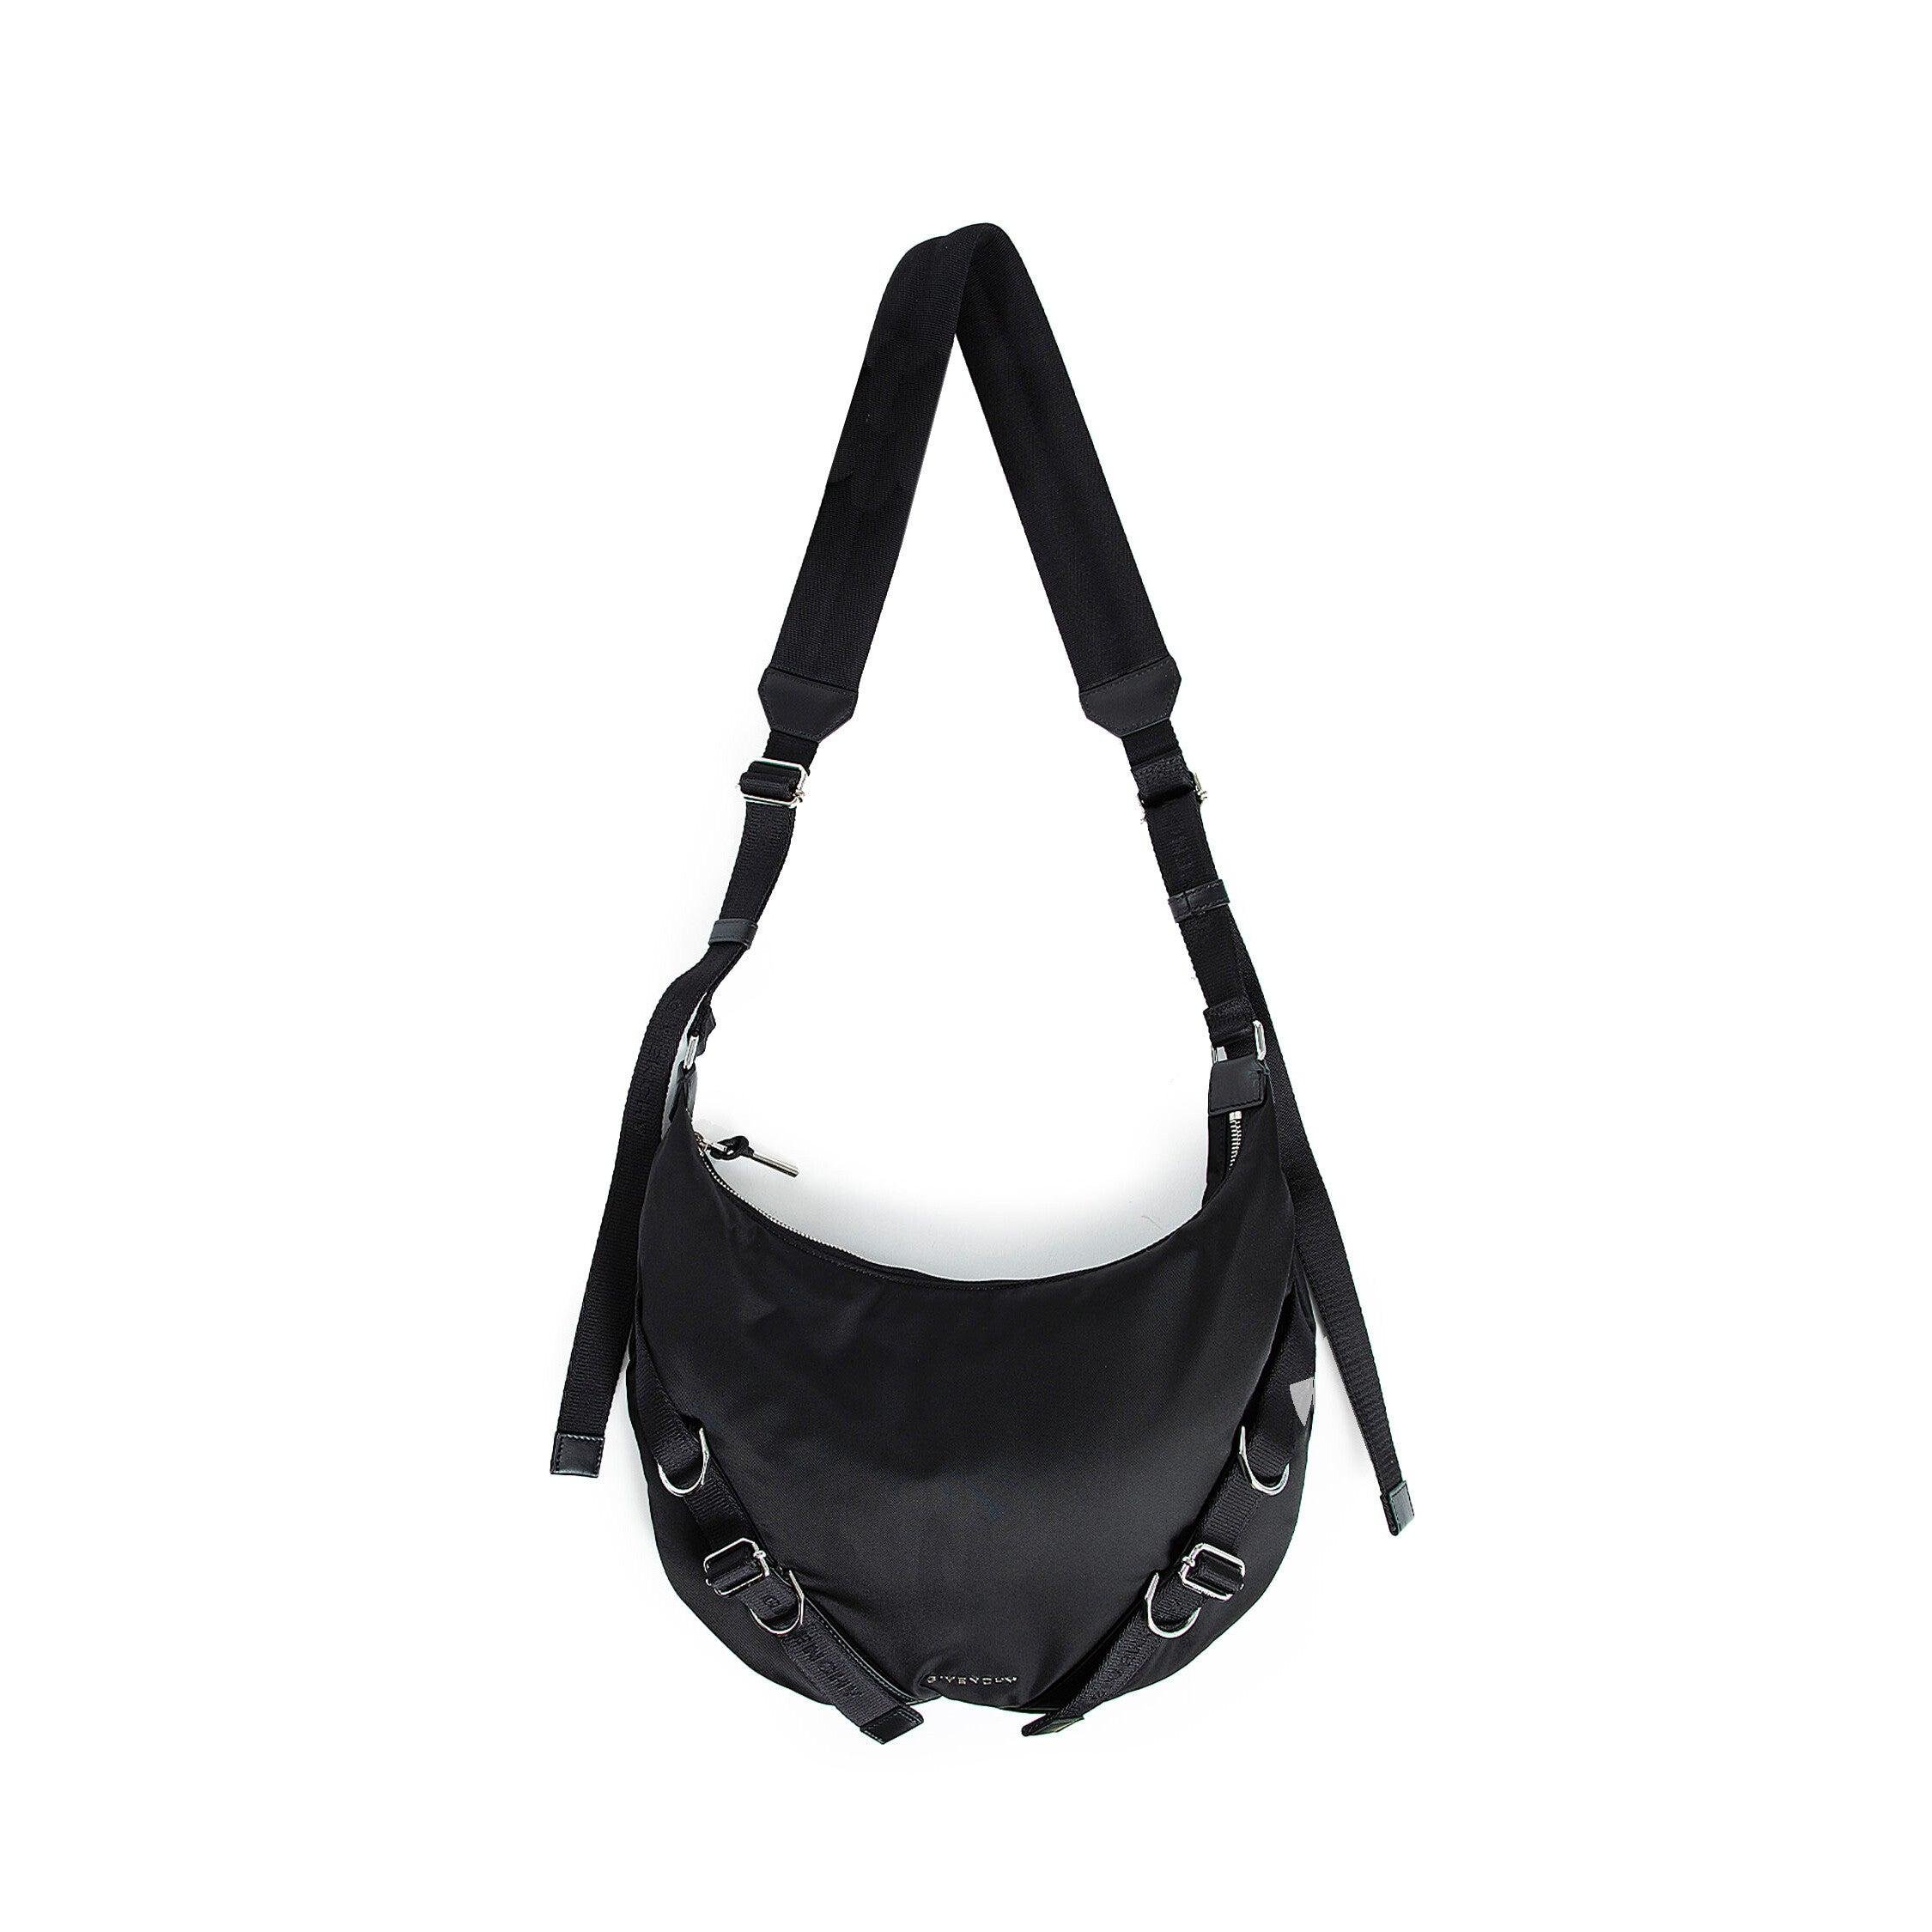 GIVENCHY MAN BLACK SHOULDER BAGS by GIVENCHY